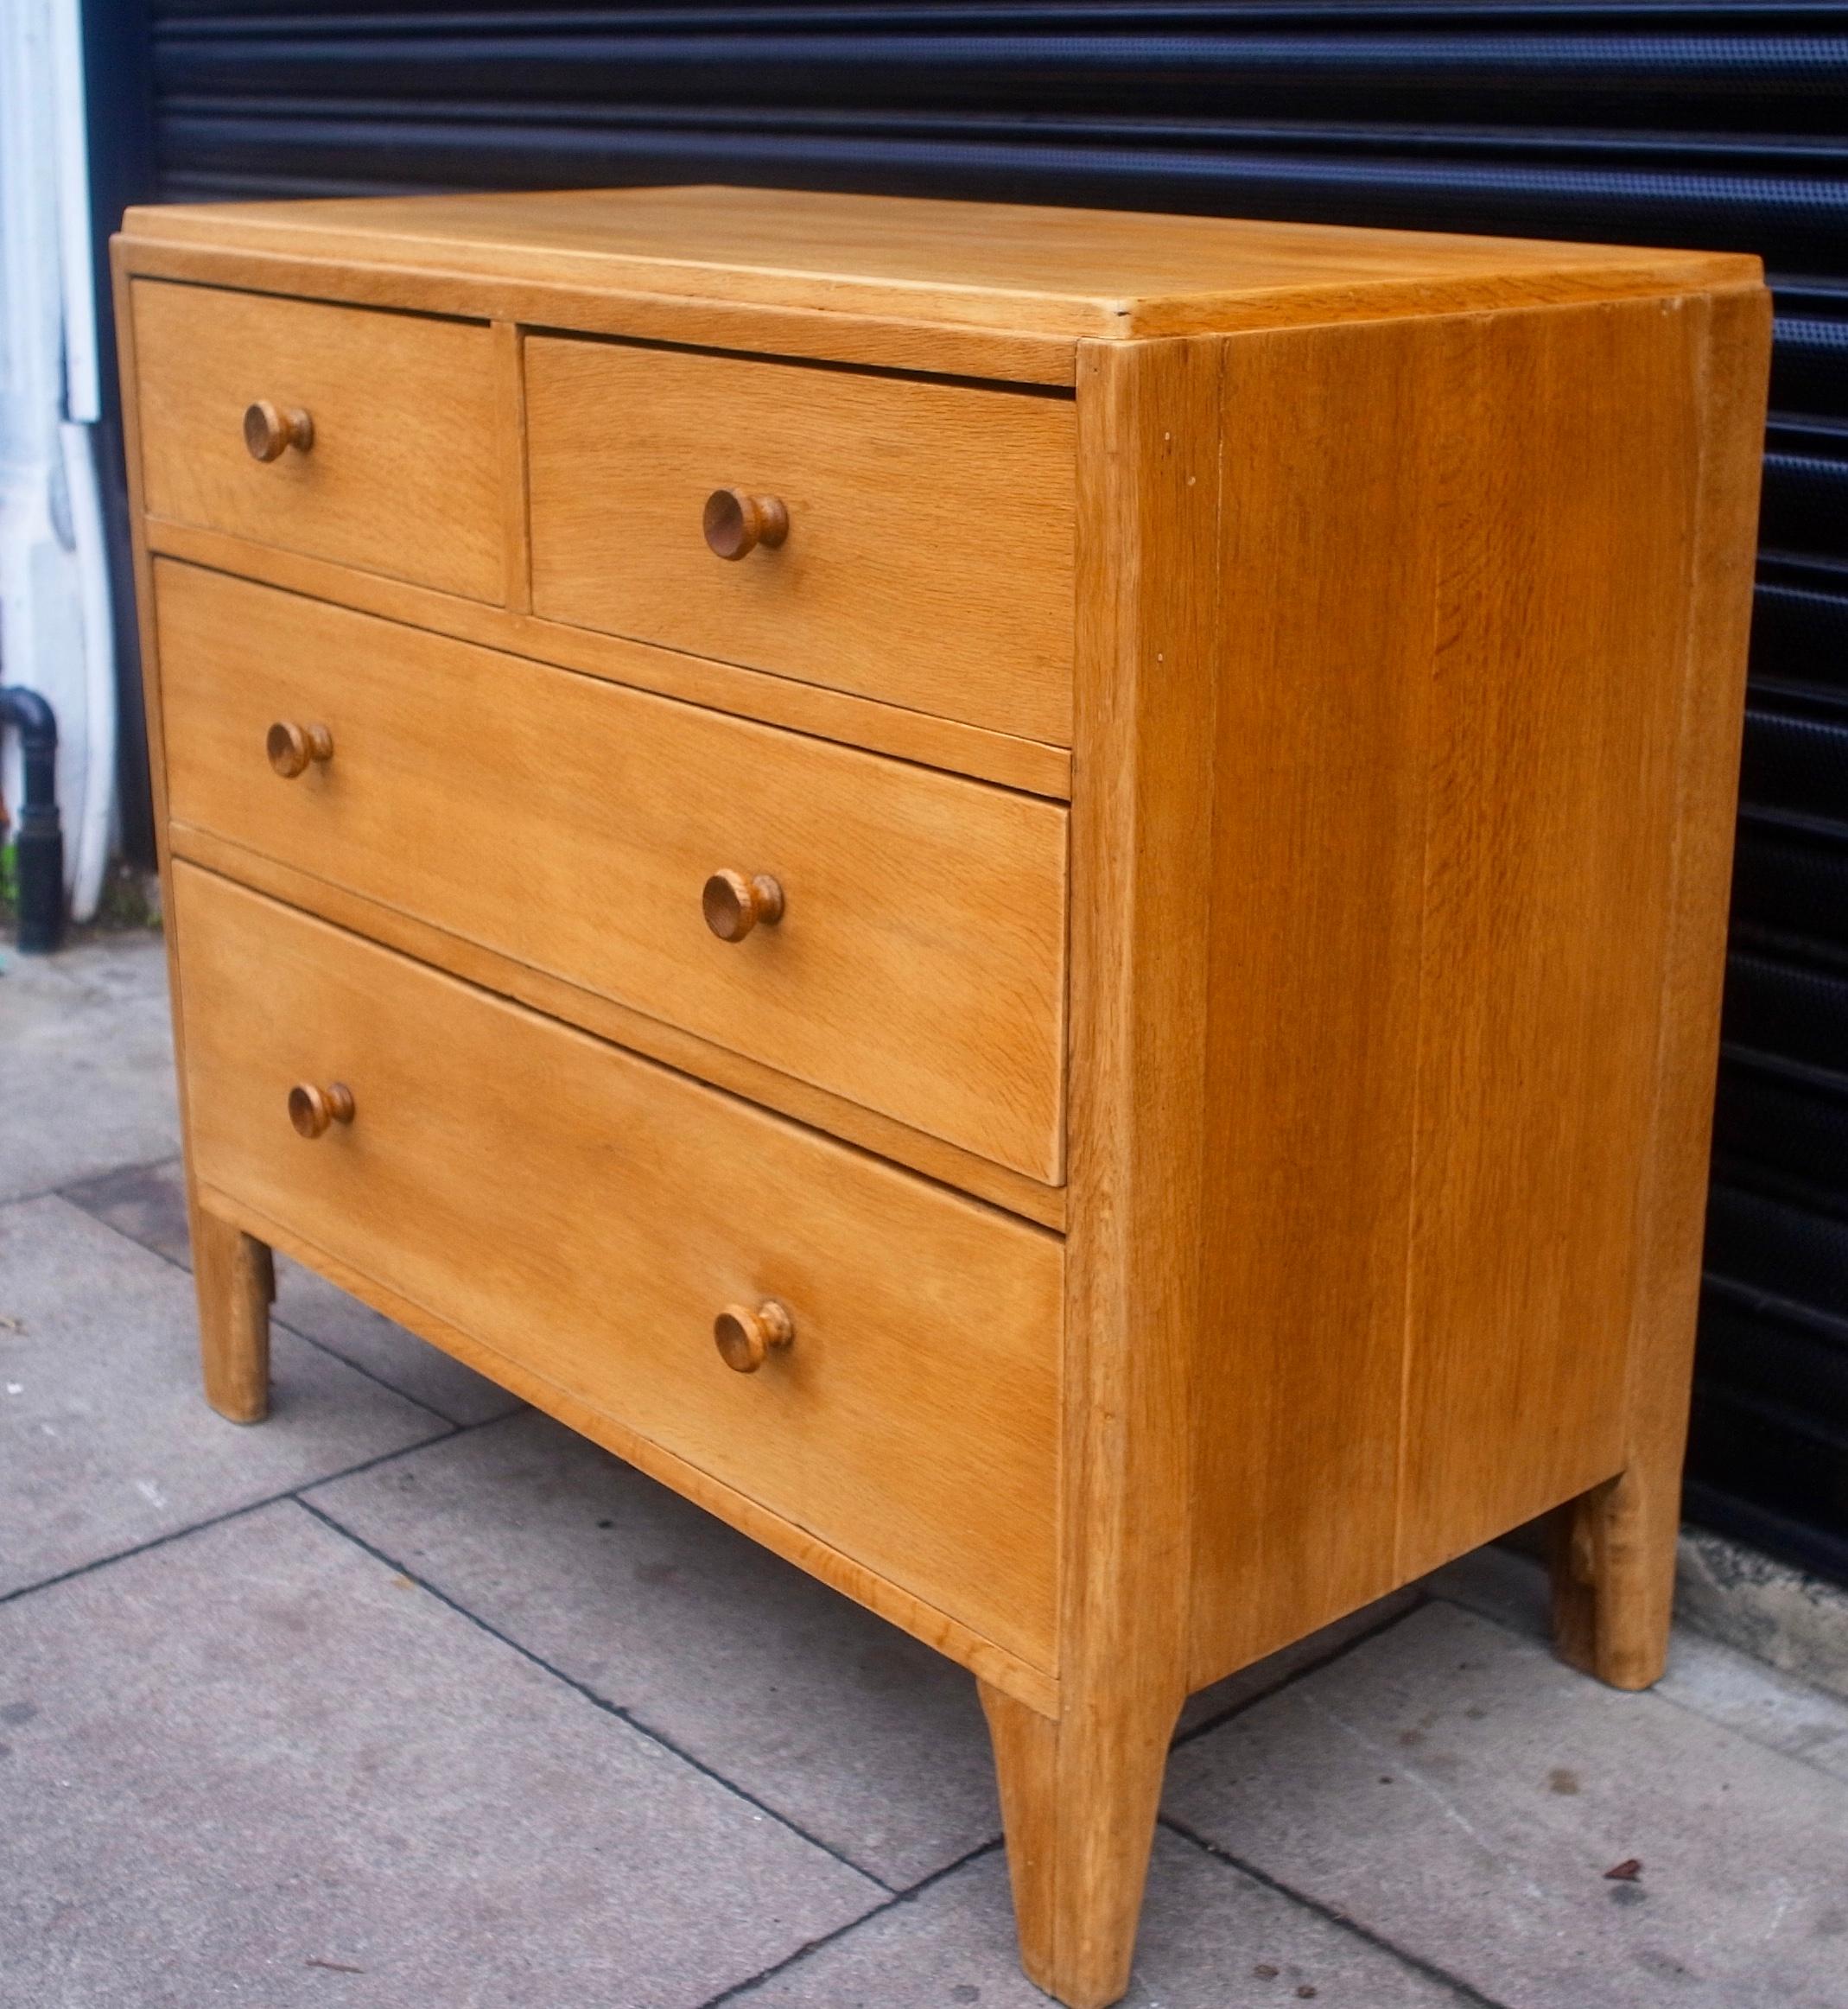 A very stylish and beautifully proportioned vintage 1950s, military issue Oak veneered, chest of four drawers, with two smaller drawers set over two larger. This piece was manufactured by British company 'W.M. Lawrence & Co Ltd', and is in very good